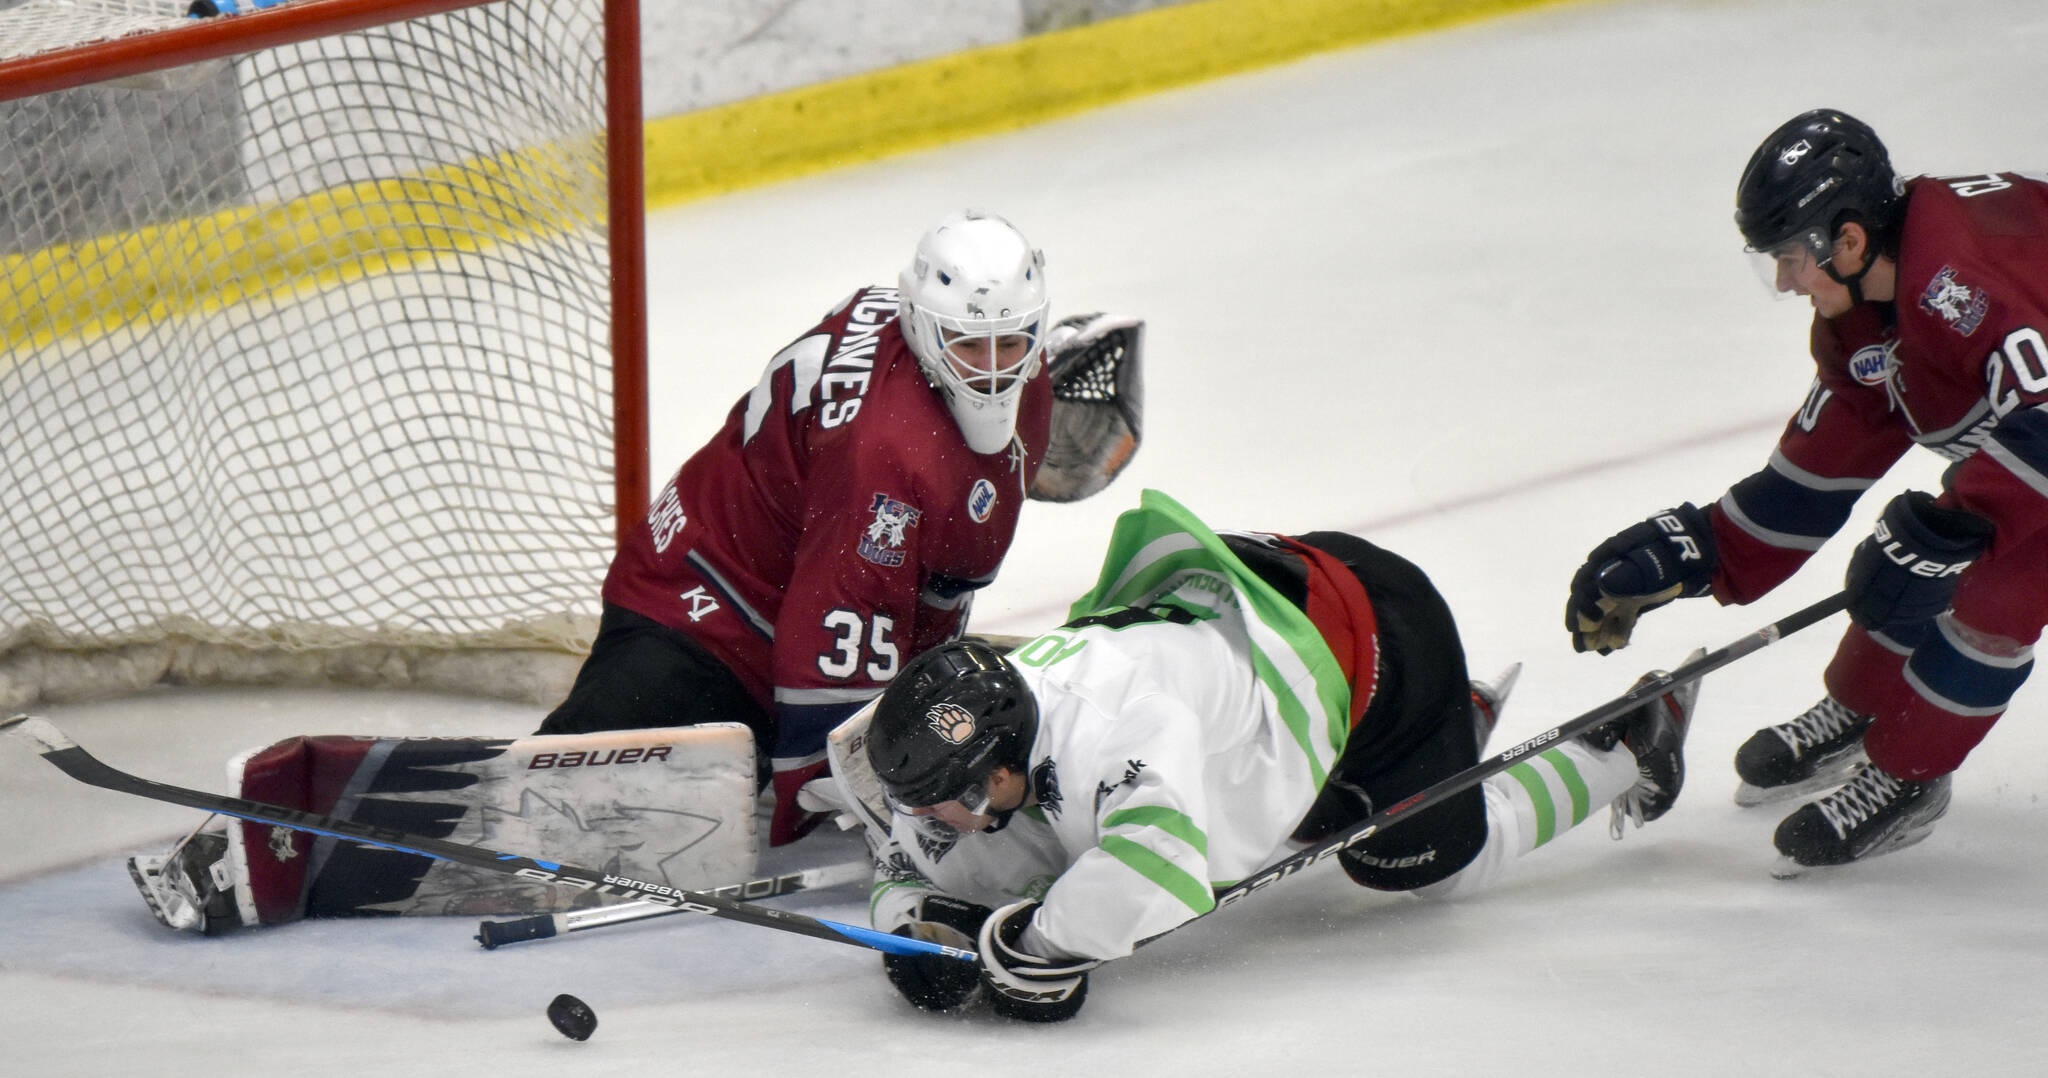 Kenai River Brown Bears forward Noah Holt draws a penalty on David Clarke of the Fairbanks Ice Dogs in front of goalie Kayden Hargraves on Saturday, Feb. 18, 2023, at the Soldotna Regional Sports Complex in Soldotna, Alaska. (Photo by Jeff Helminiak/Peninsula Clarion)